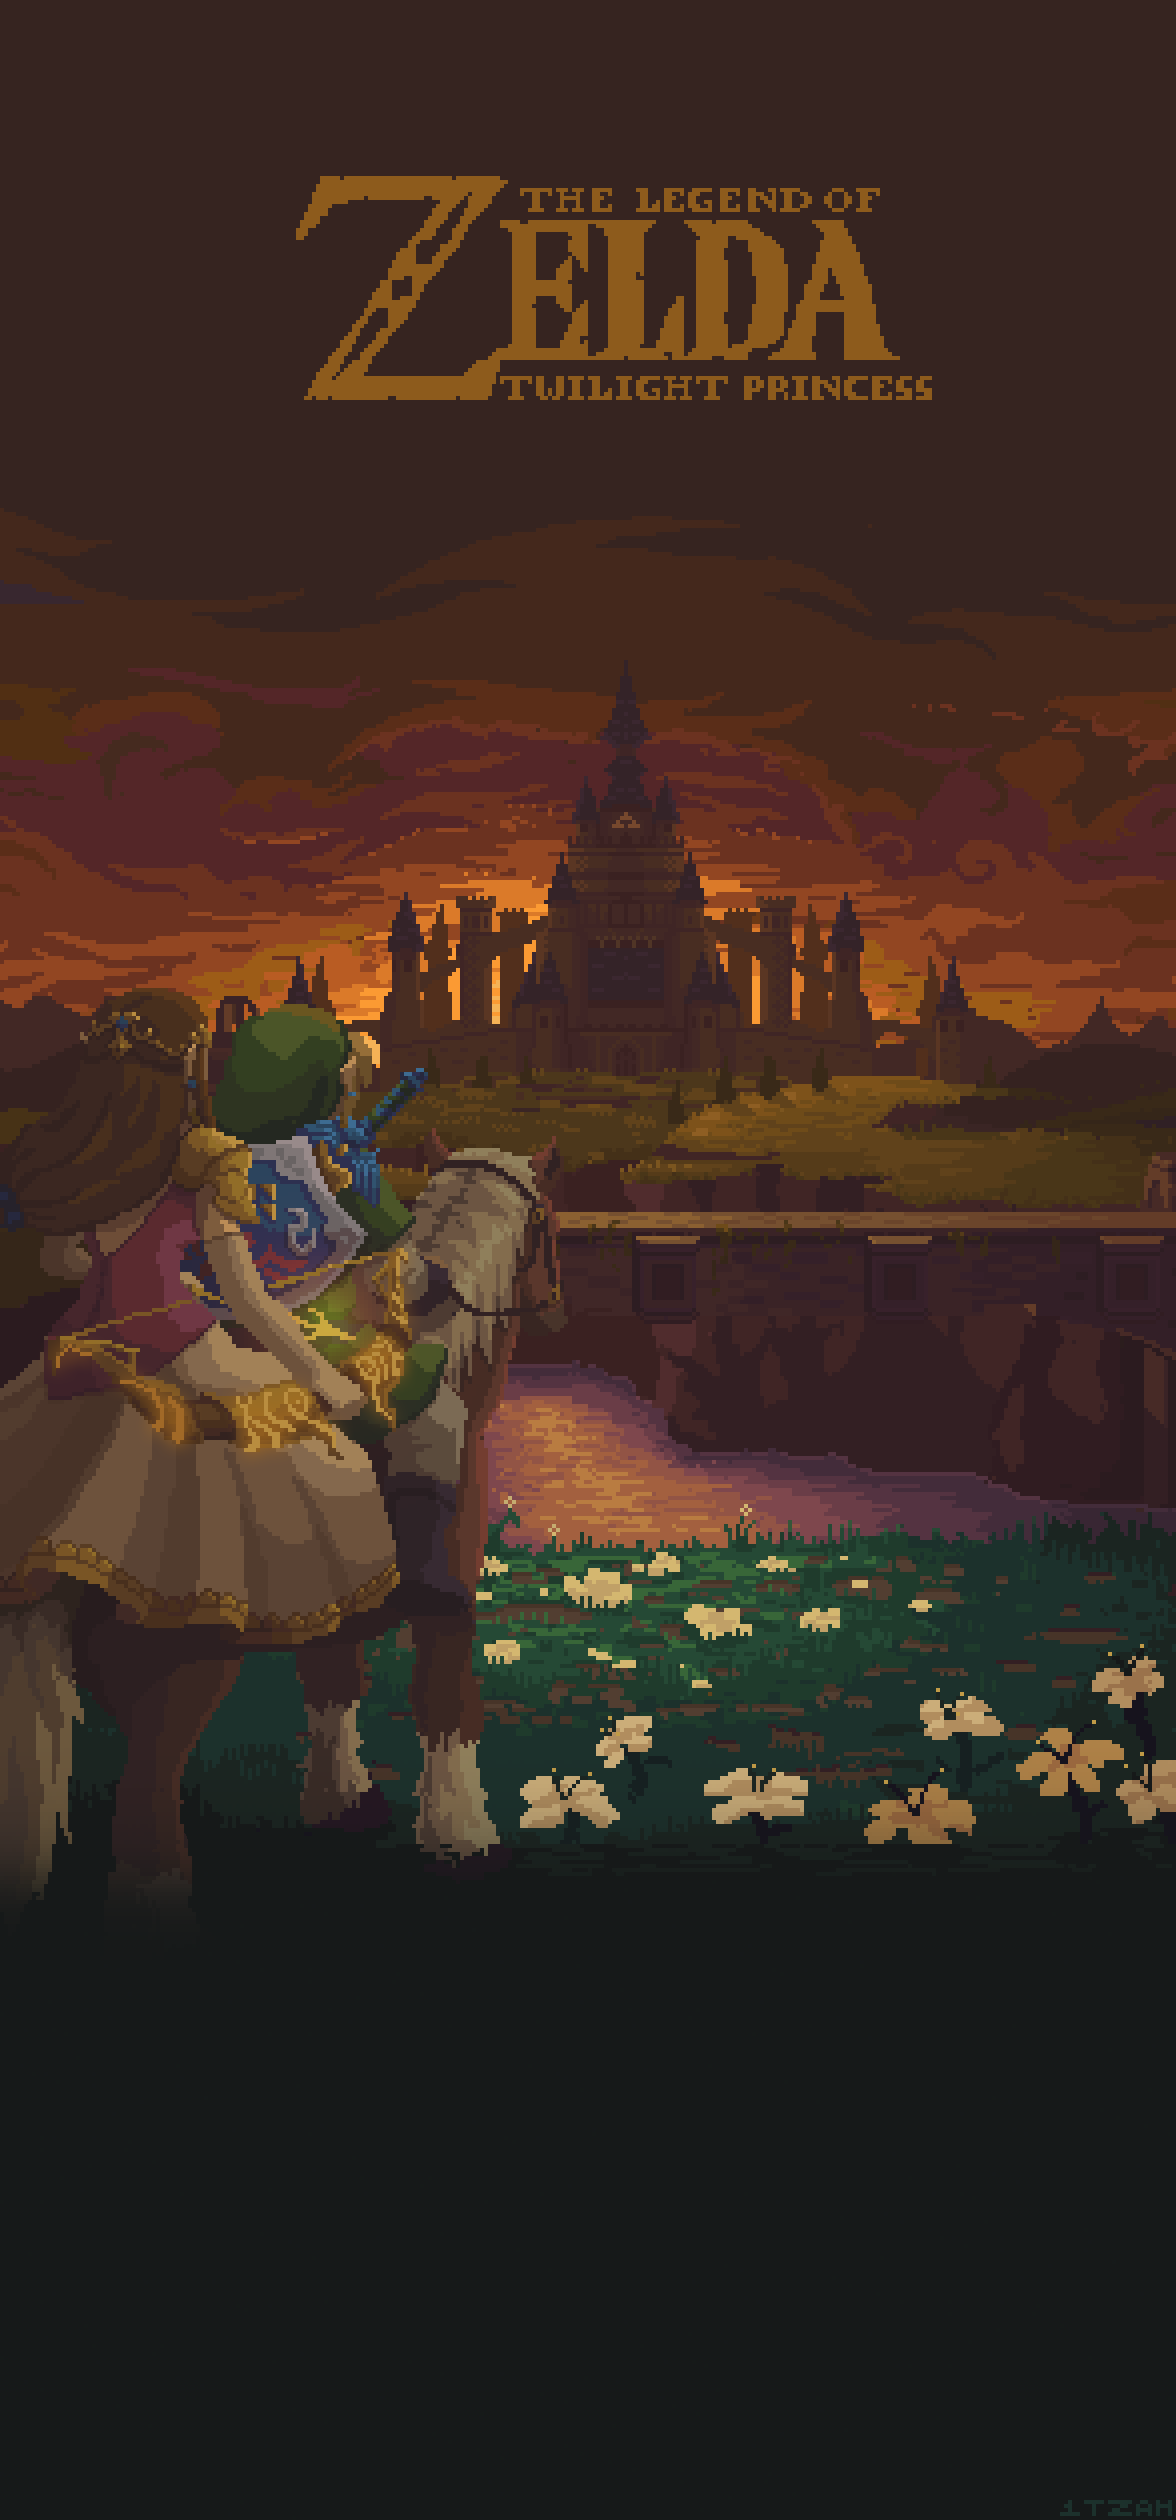 1boy 1girl absurdres bow_(weapon) bridge castle clouds cloudy_sky copyright_name english_text epona evening falling_leaves flower from_behind grass highres holding holding_bow_(weapon) holding_weapon horizon horse horseback_riding hylian_shield hyrule_castle itzah leaf link logo male_focus master_sword nature outdoors pixel_art princess_zelda riding scenery shield shield_on_back sky sword sword_on_back the_legend_of_zelda the_legend_of_zelda:_twilight_princess weapon weapon_on_back wind wind_lift